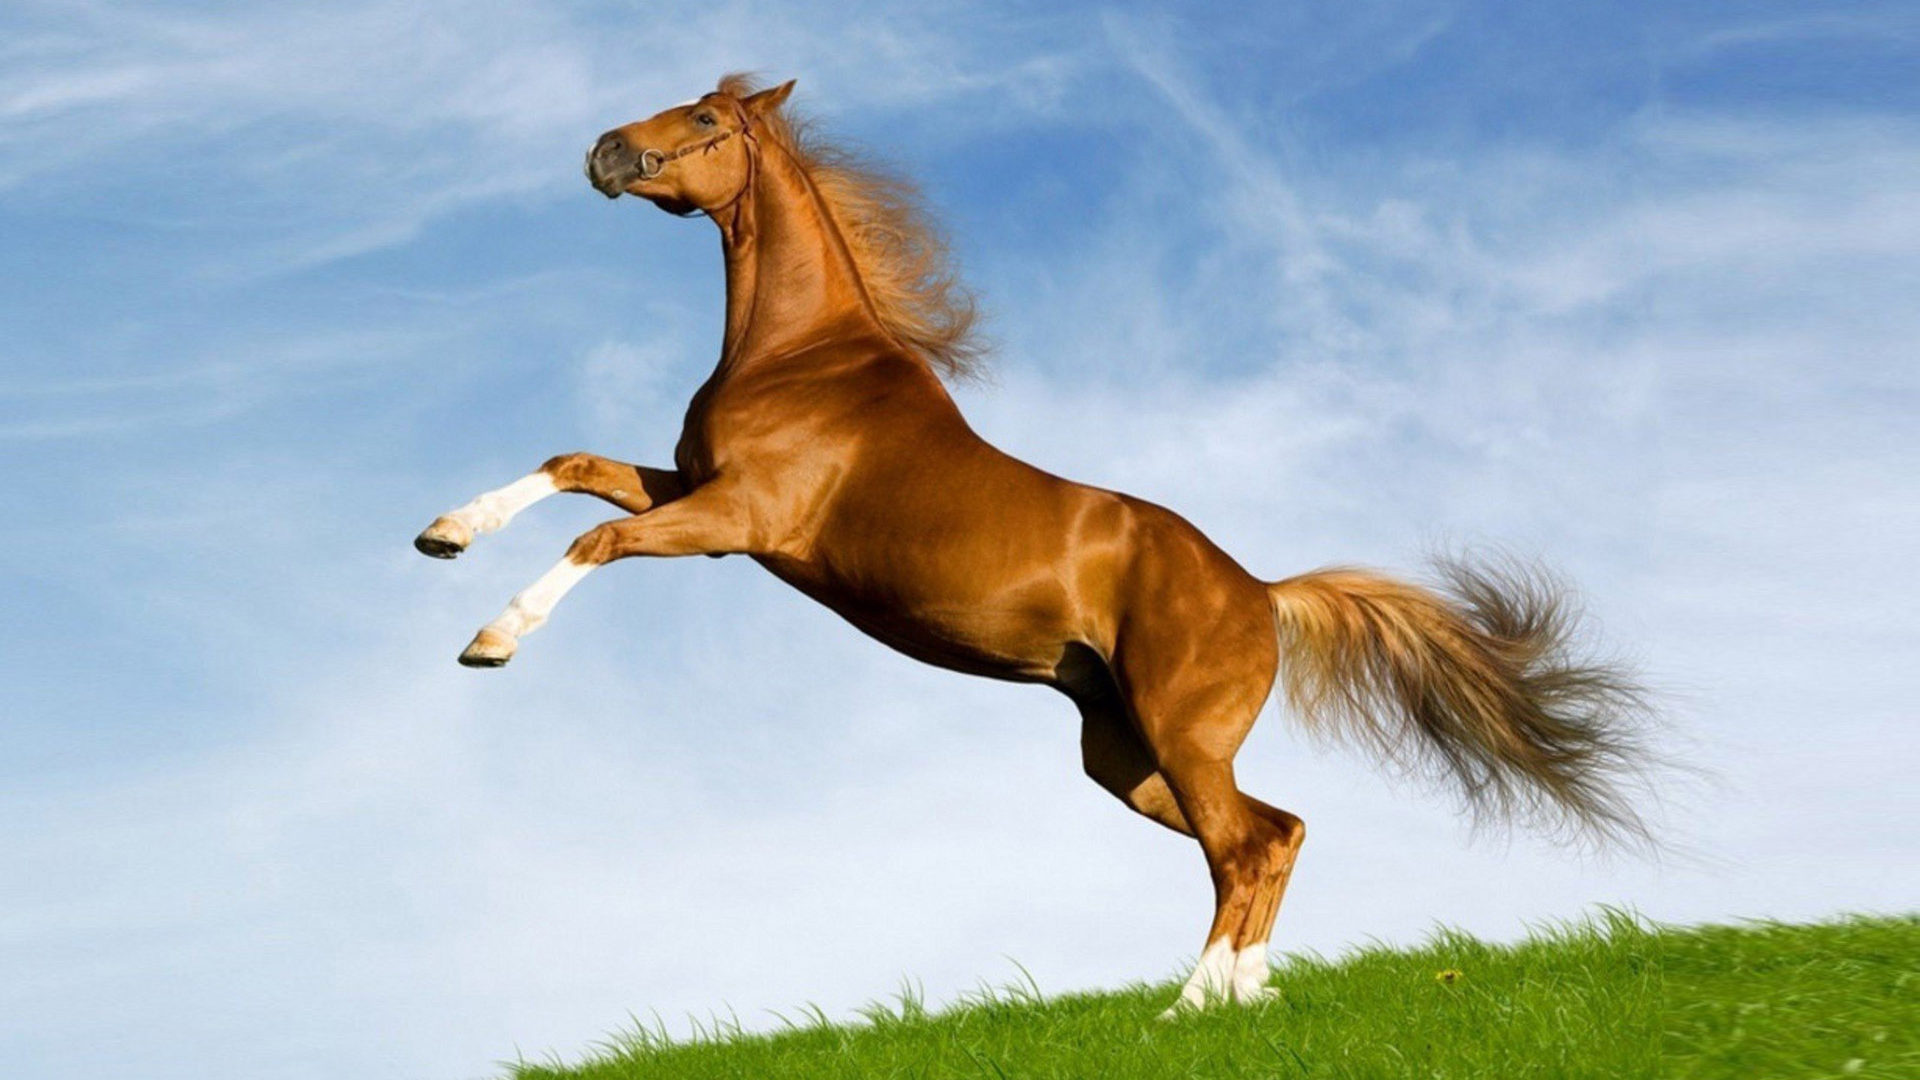 Horse: Mustang, Wild horses of the American plains. 1920x1080 Full HD Background.